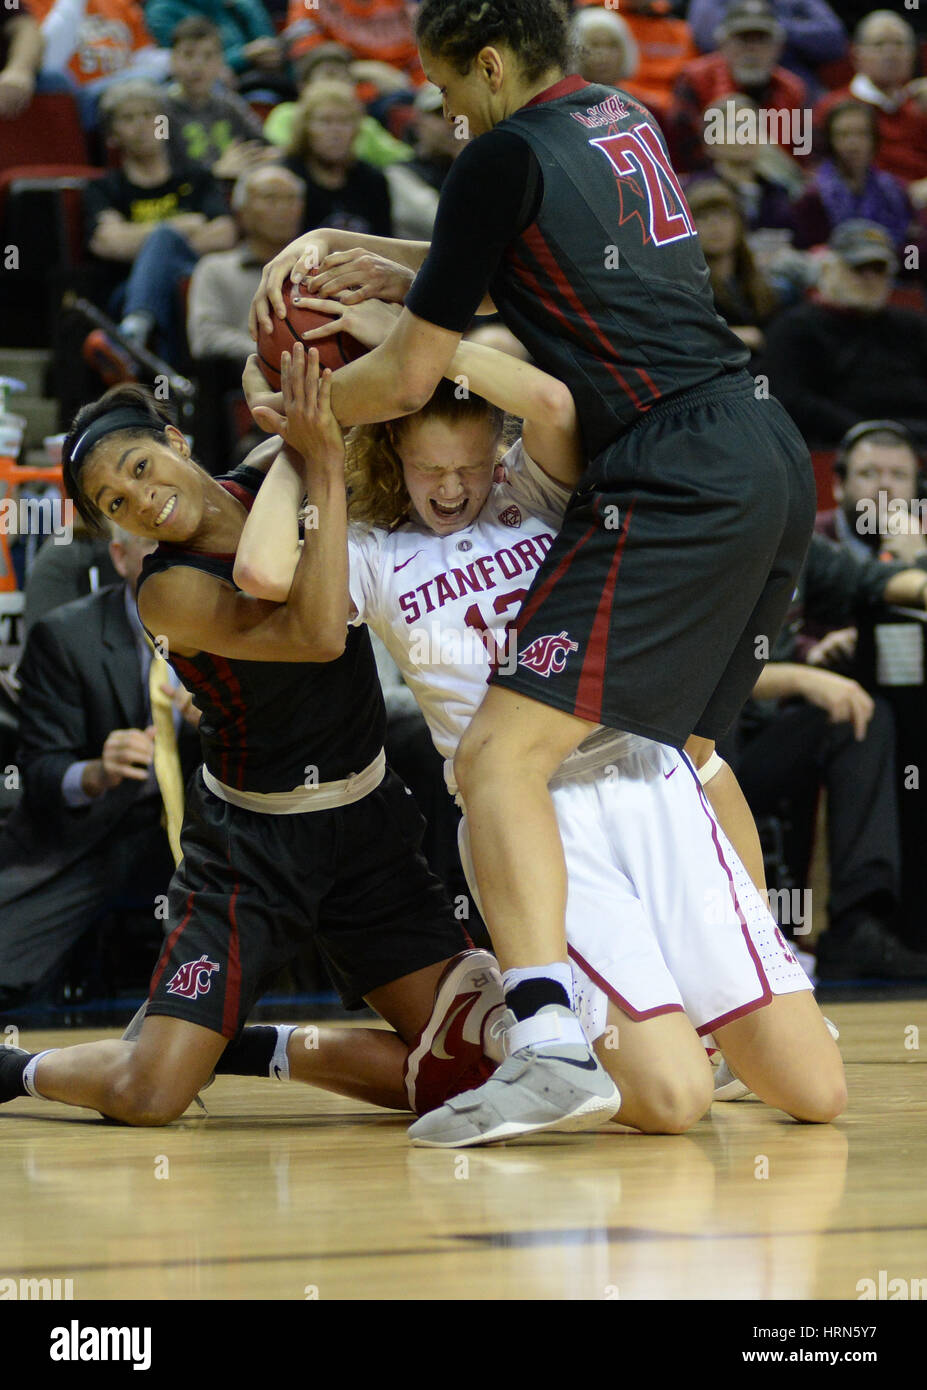 Seattle, WA, USA. 3rd Mar, 2017. Stanford guard Brittany McPhee (12) is tied up by WSU's Nike McClure (21) and Caila Hailey (1) during a PAC12 women's tournament game between the Washington State Cougars and the Stanford Cardinal. The game was played at Key Arena in Seattle, WA. Jeff Halstead/CSM/Alamy Live News Stock Photo